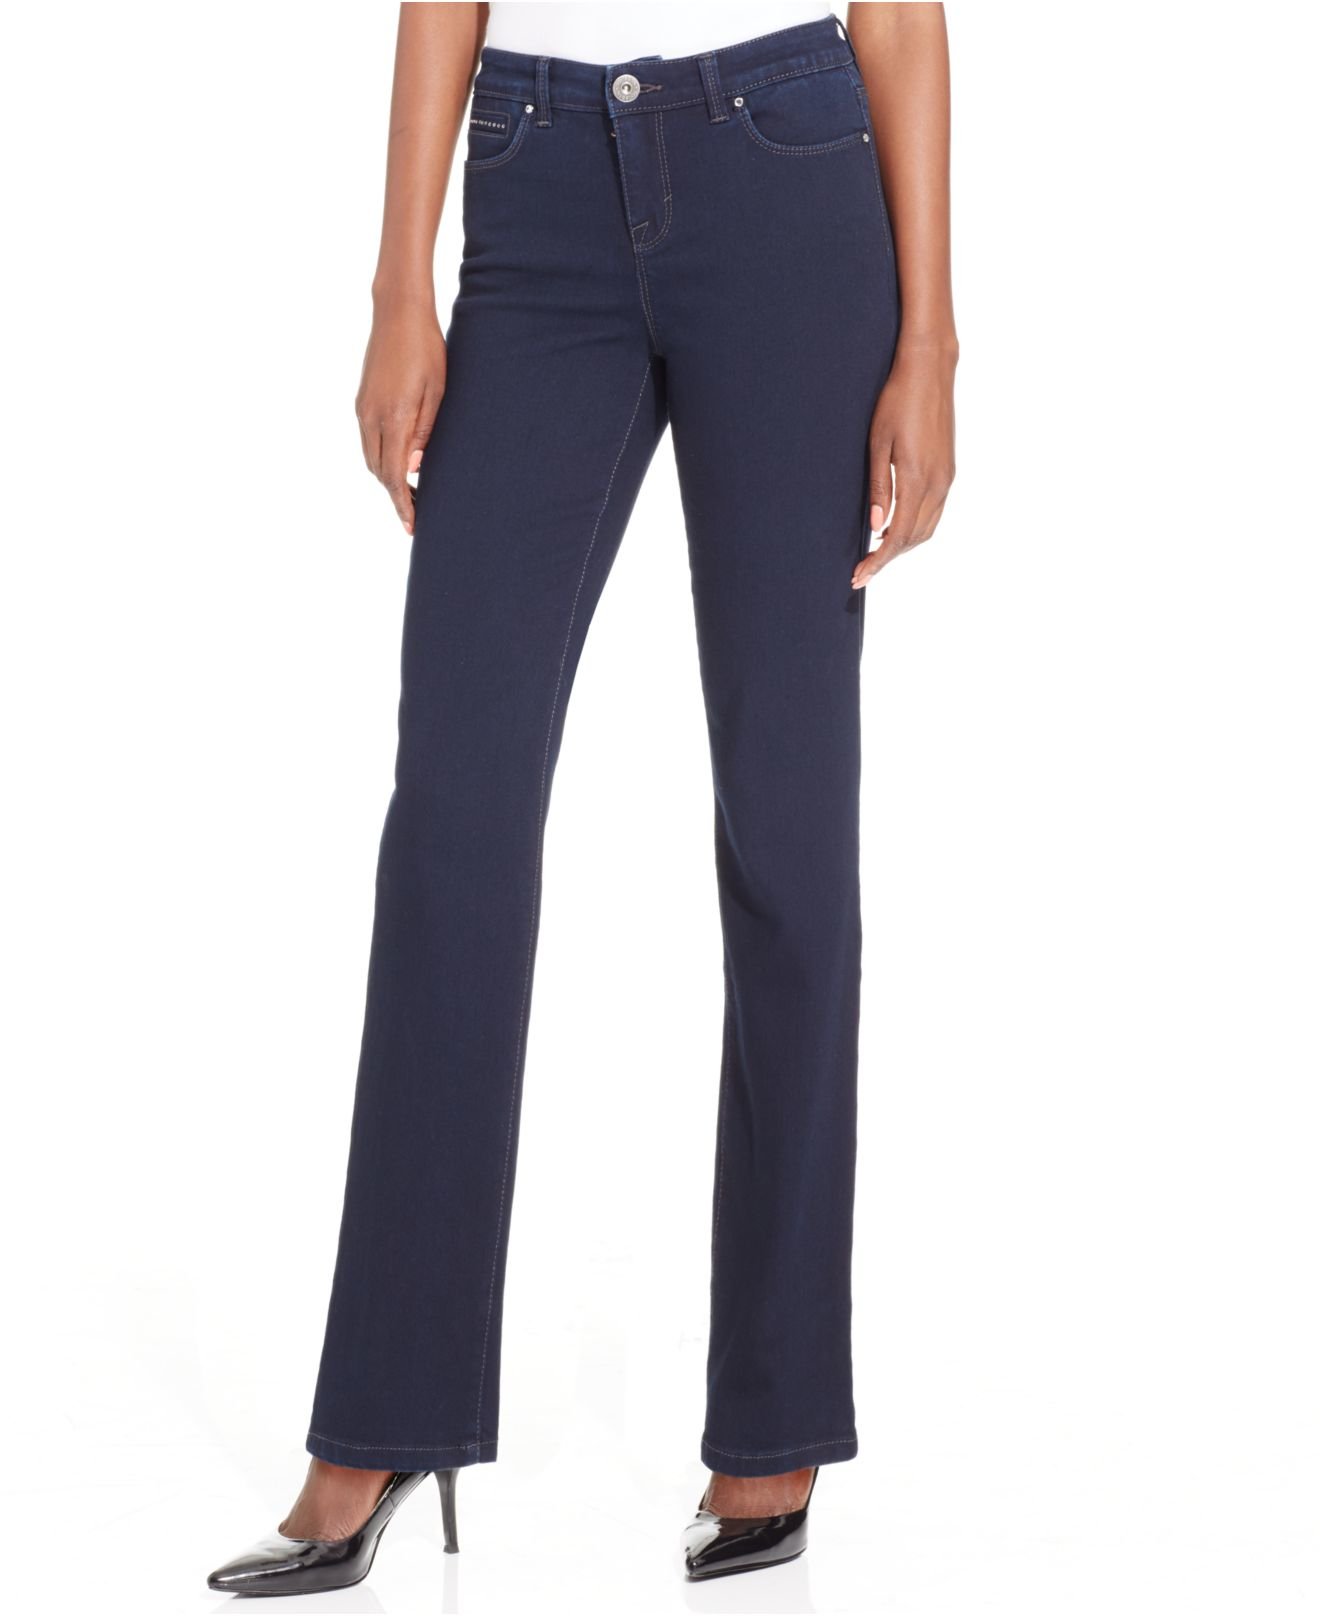 Lyst - Style & Co. Petite Tummy-control Embellished-pocket Jeans in Blue